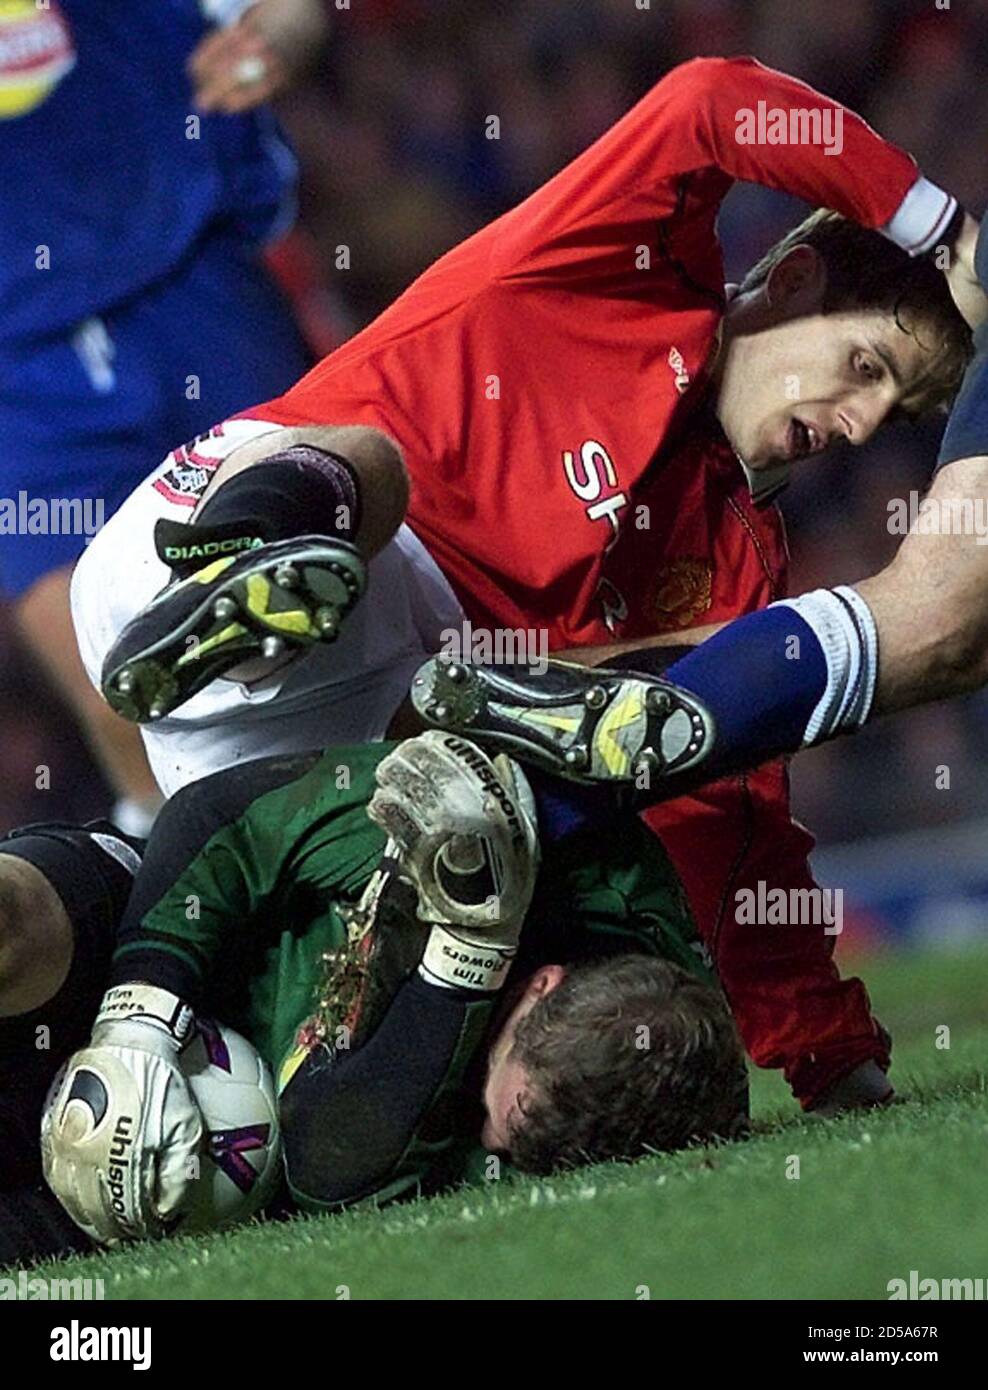 Manchester United's Phil Neville fights for the ball with Leicester City goalkeeper Tim Flowers after an attempt on goal during the FA Carling Premiership game at Old Trafford November 6. ManchesterUnited went on to win 2-0.  DC Stock Photo